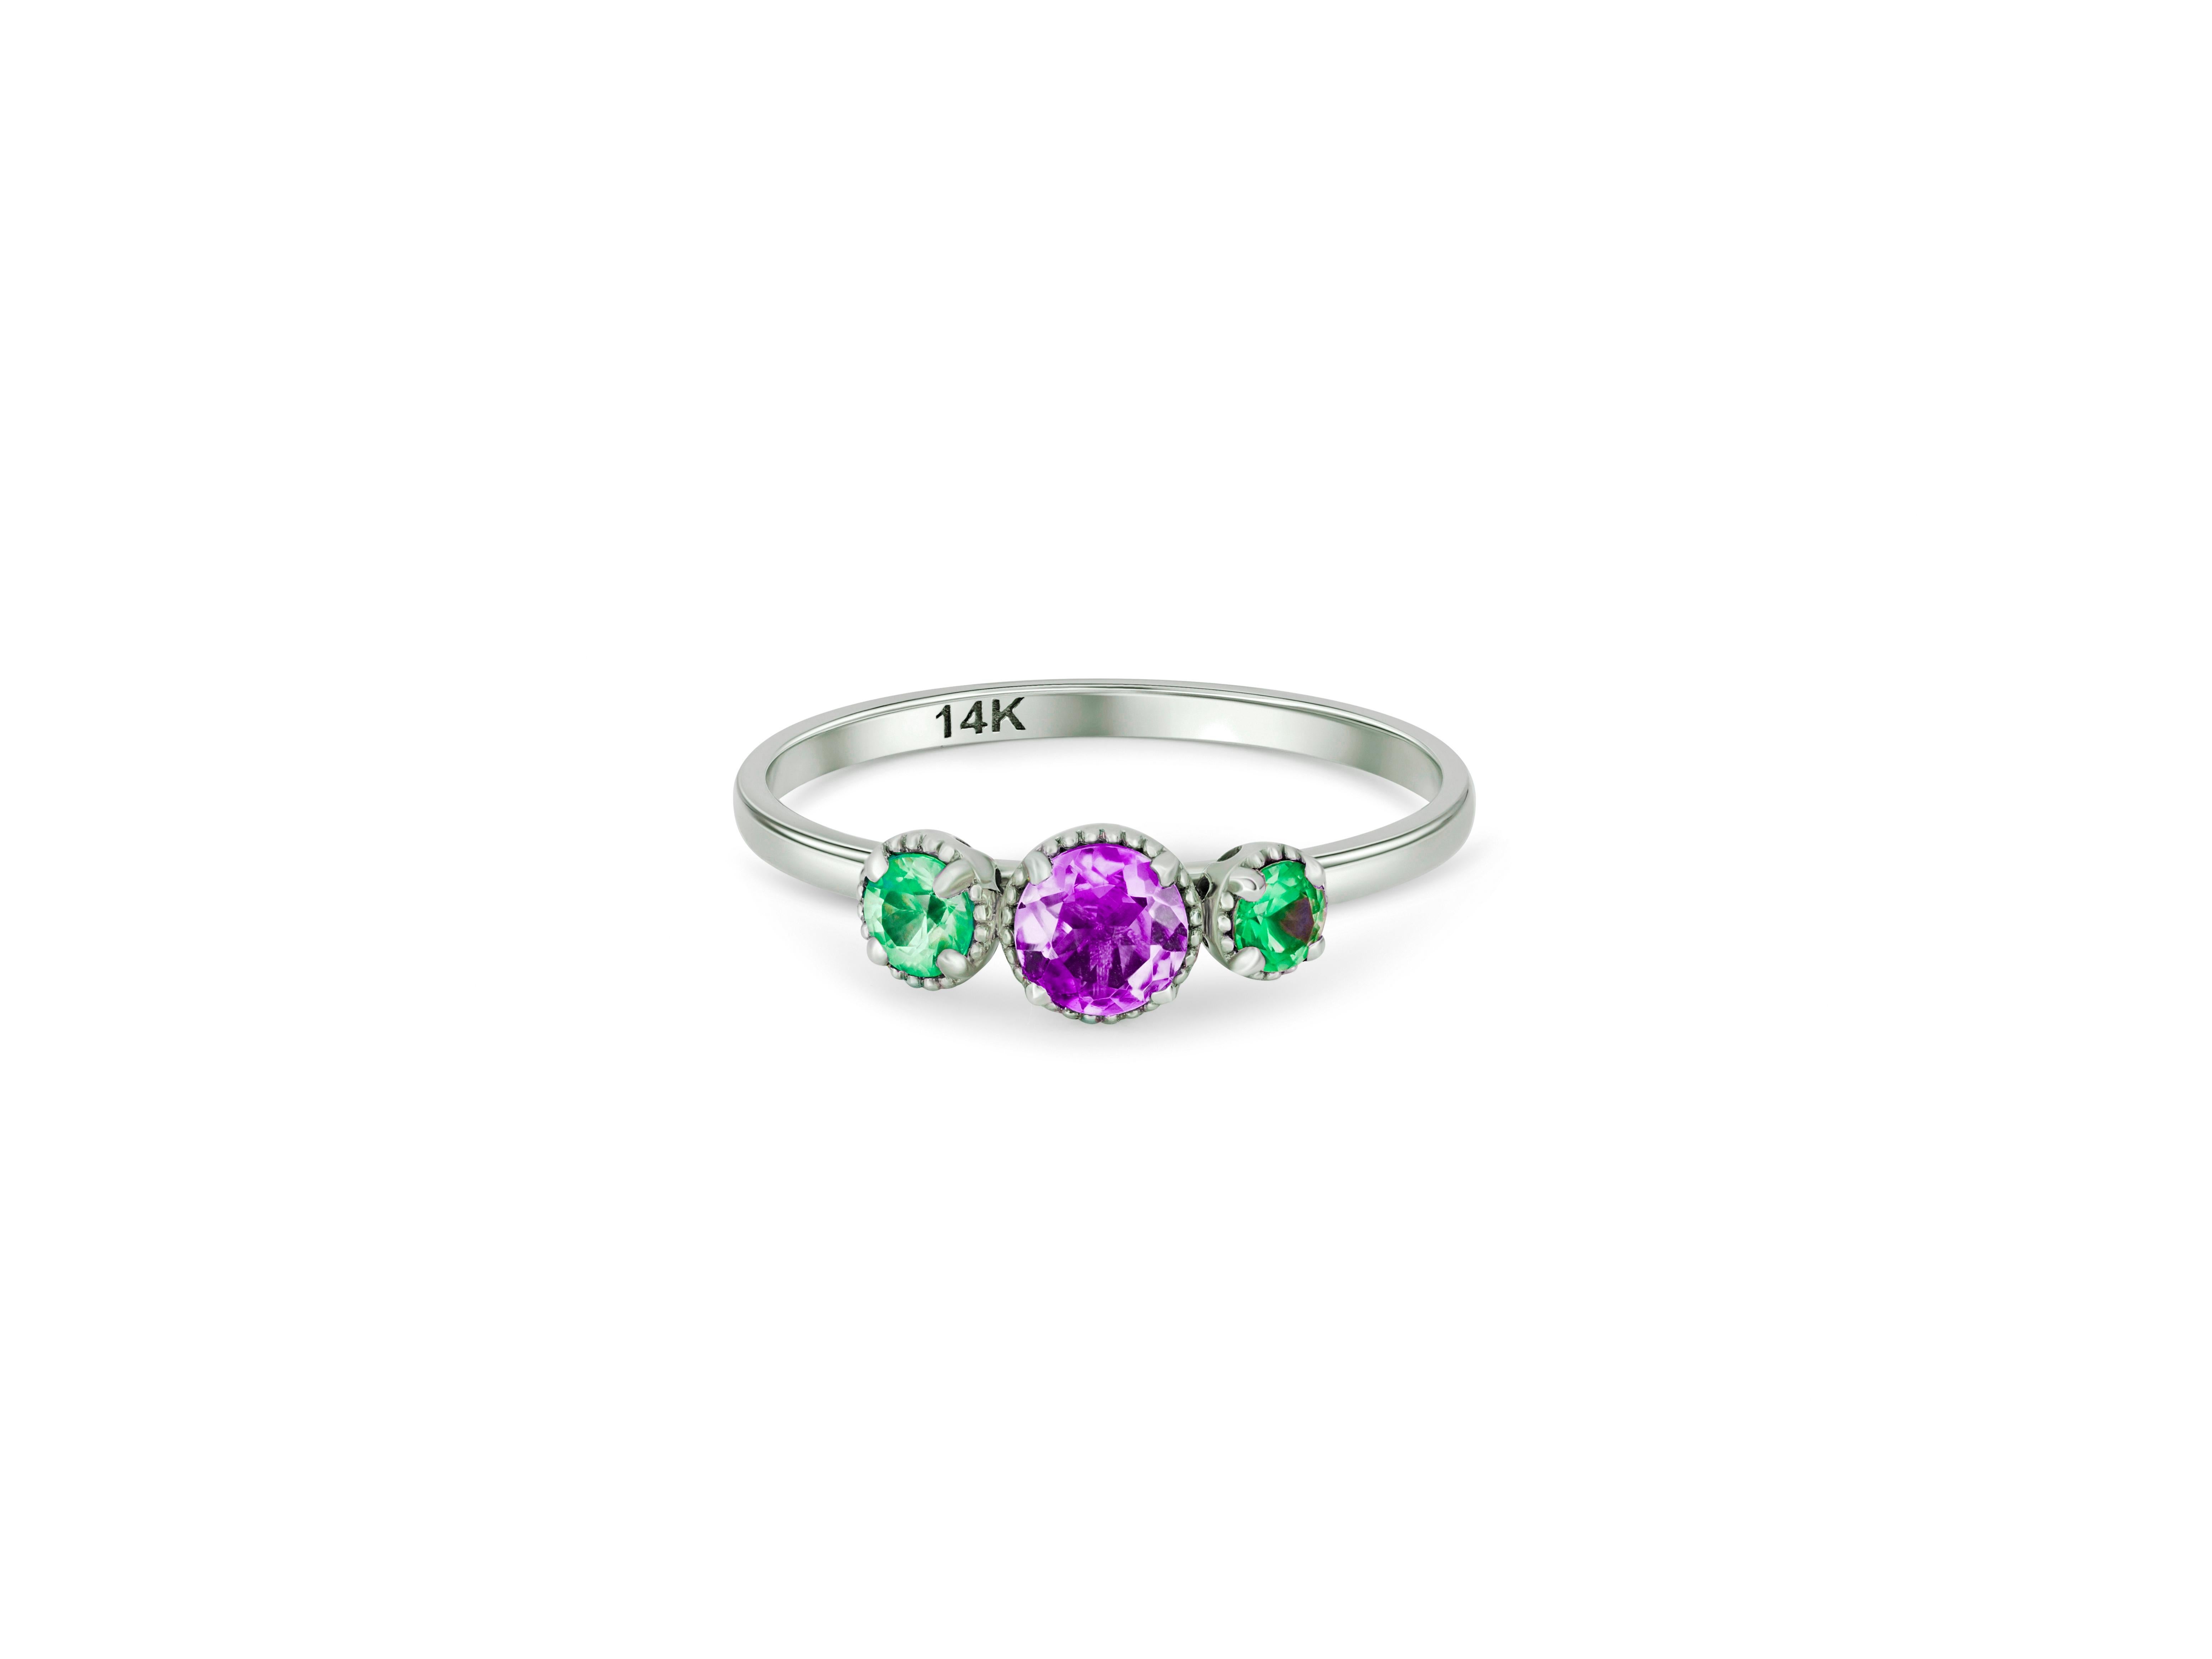 Green and purple gem 14k gold ring.
Trio gems 14k gold ring. 3 gemstone palette 14k gold ring.  Emerald  and amethyst 14k gold ring.  Color contrast gold ring.  

Metal: 14k gold
Weight: 1.8 gr depends from size

Gemstones:
Green: lab emerald, round